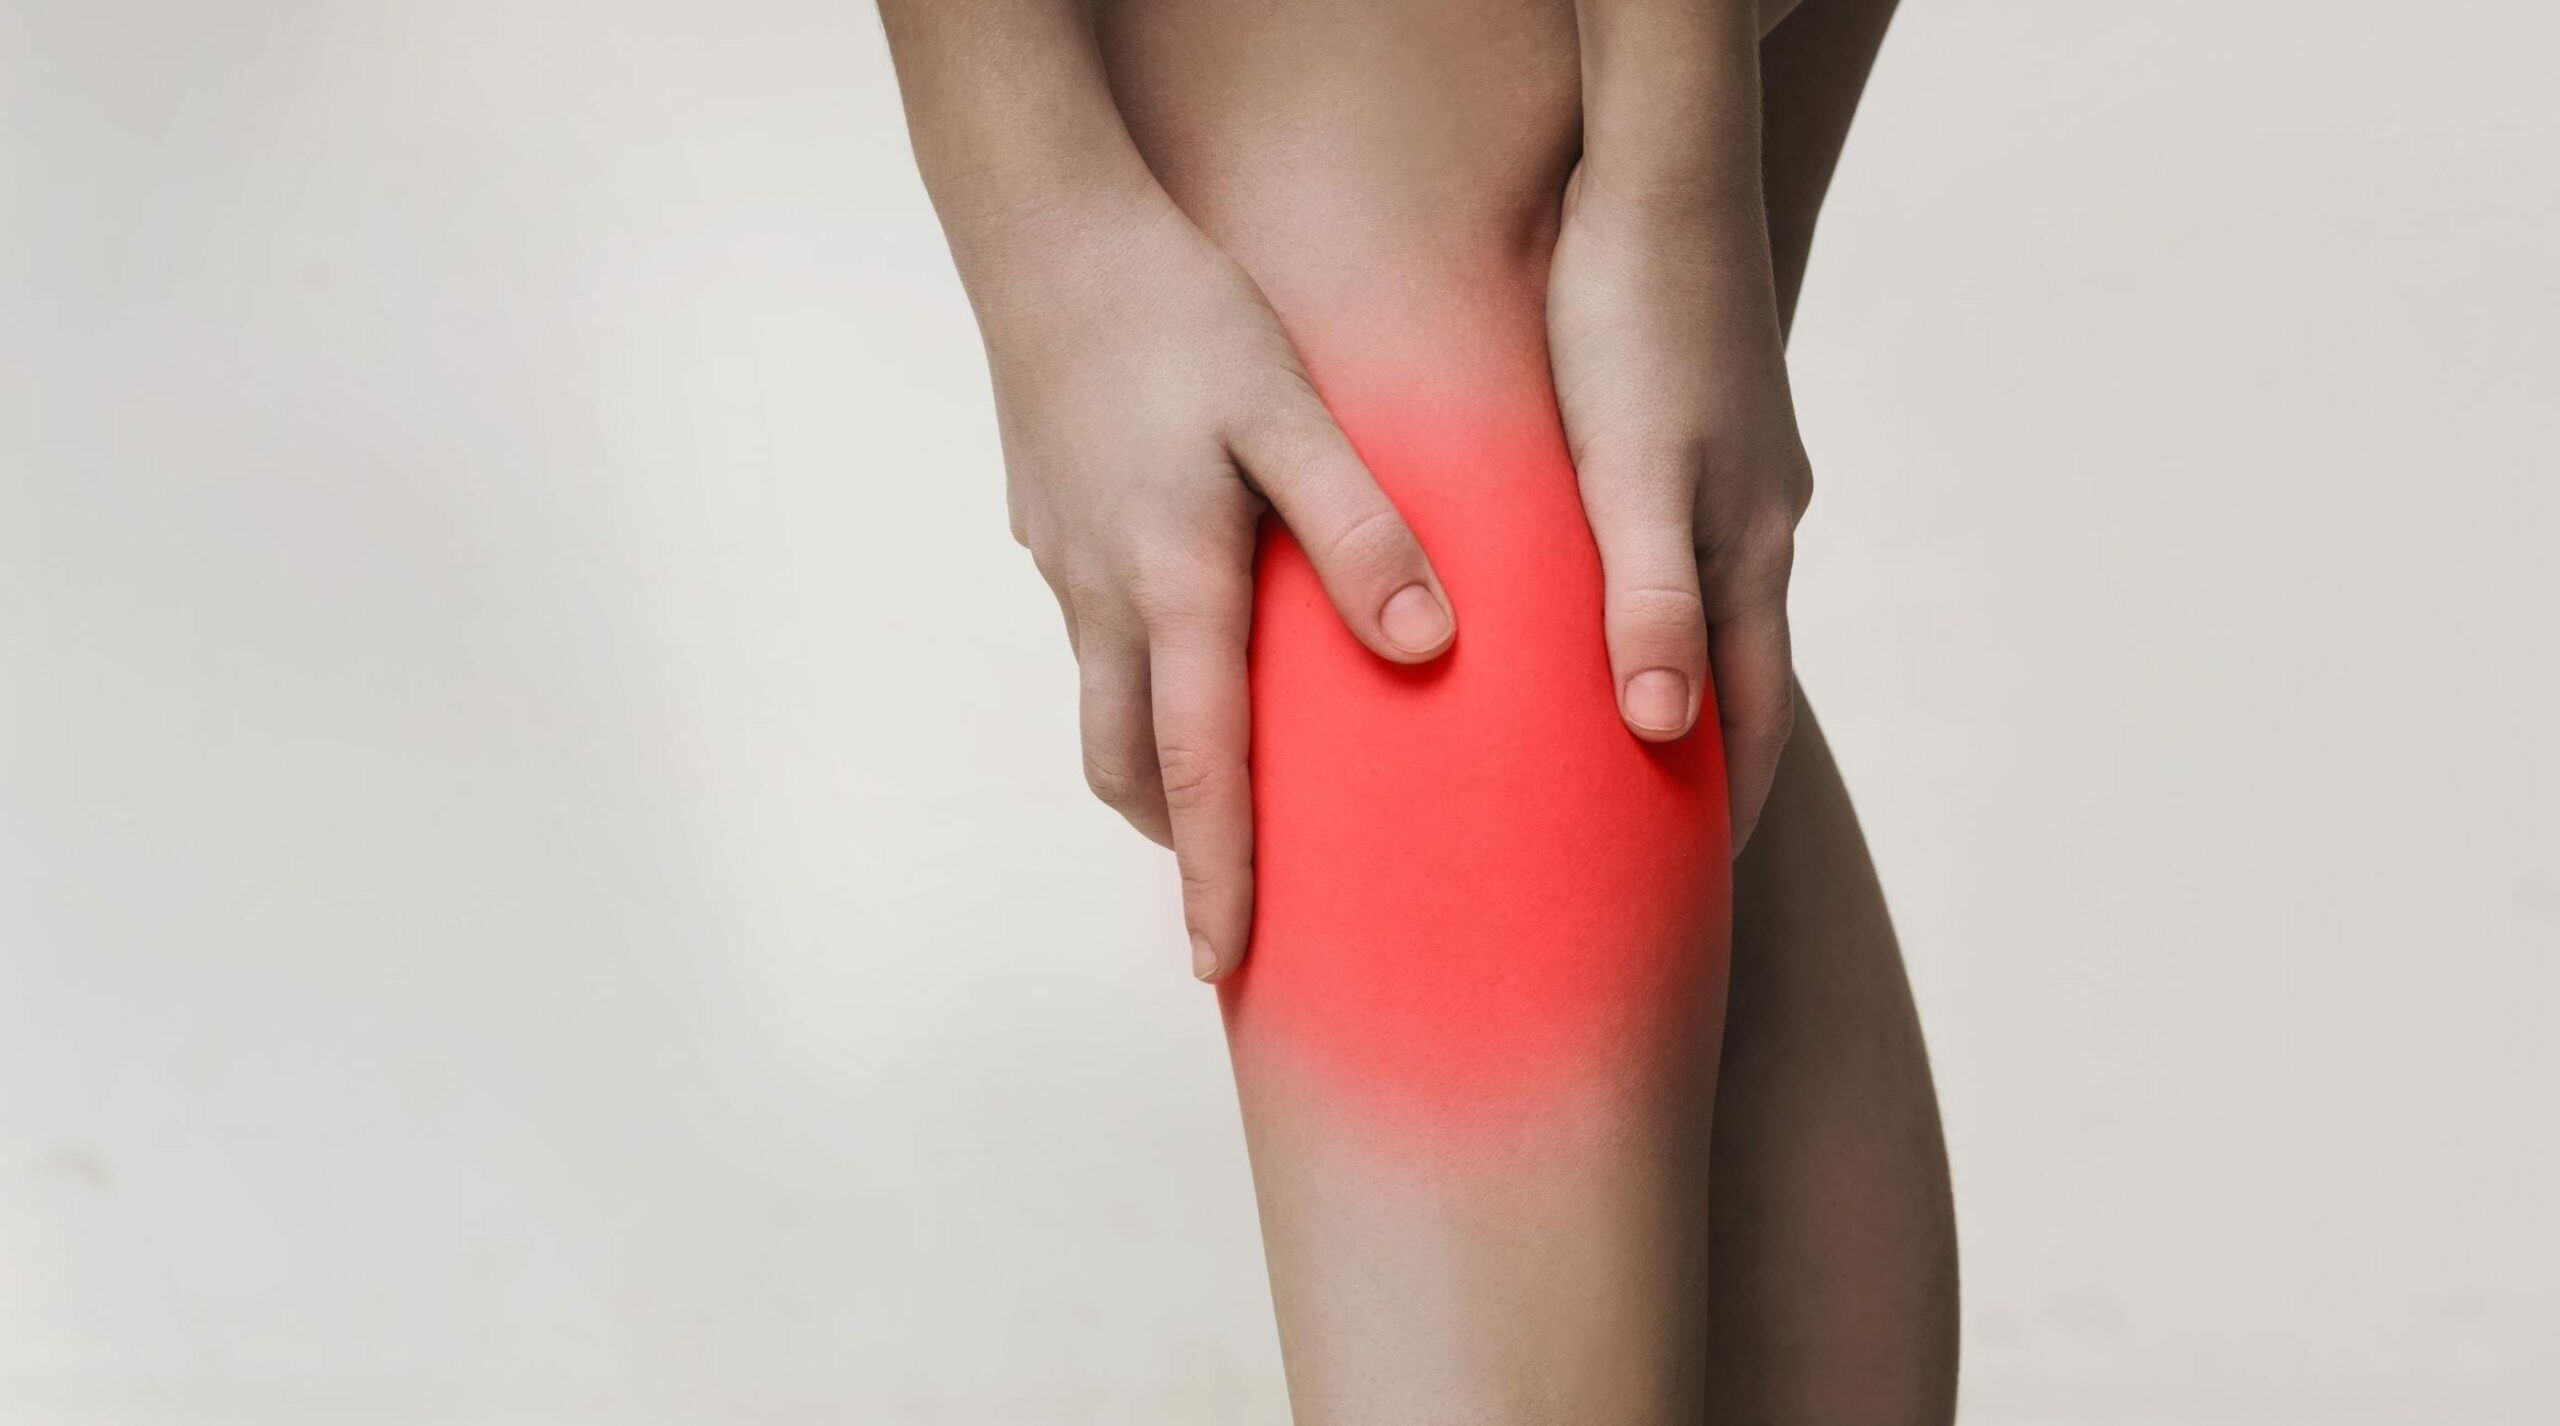 ACL Injuries rehabilitation with Dr. Irrgang, MD and Dr. Fu, MD